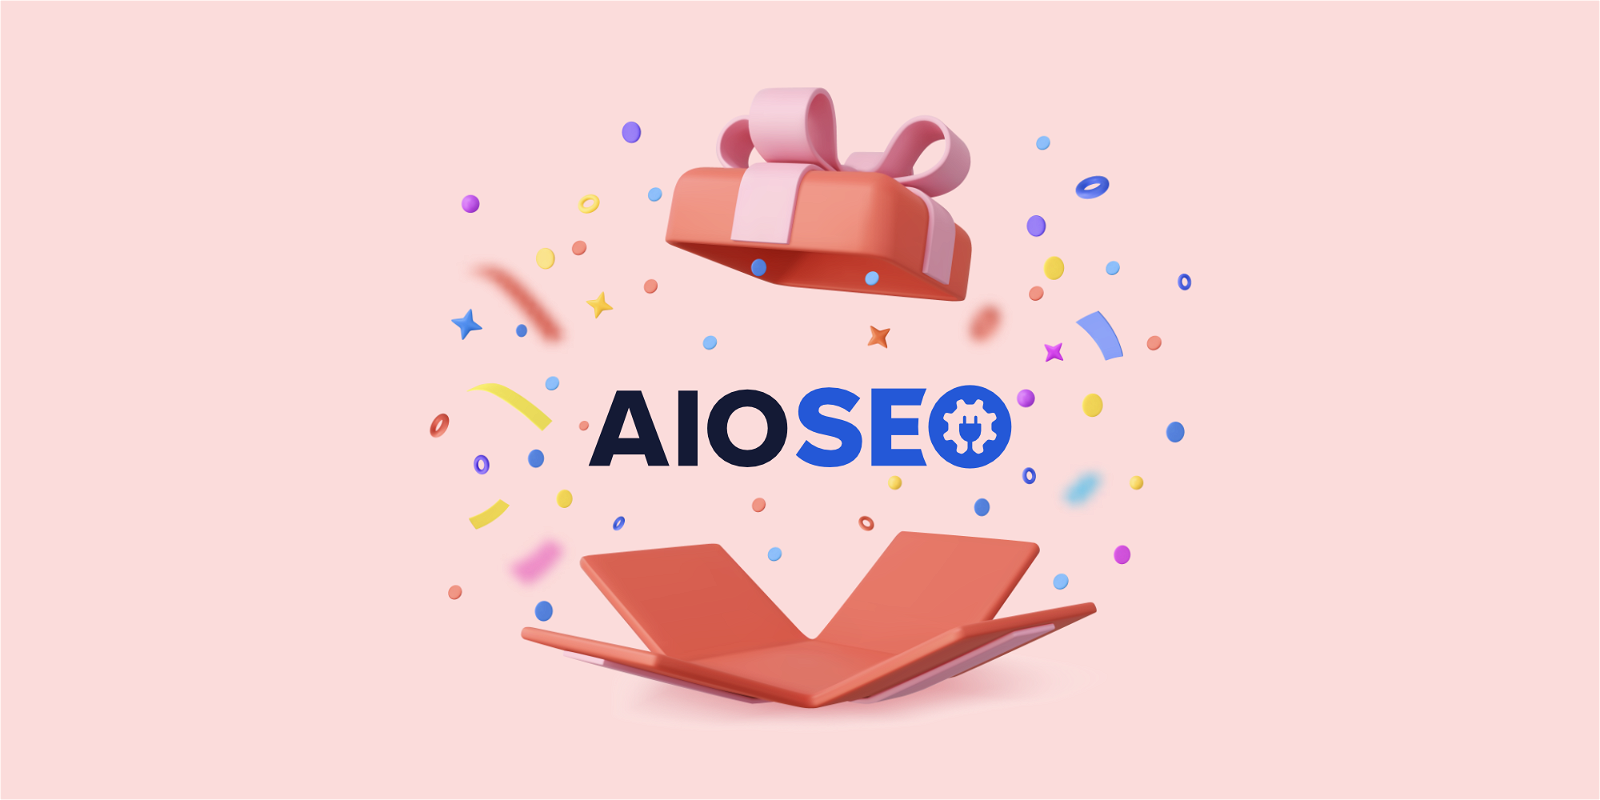 AIOSEO Giveaway